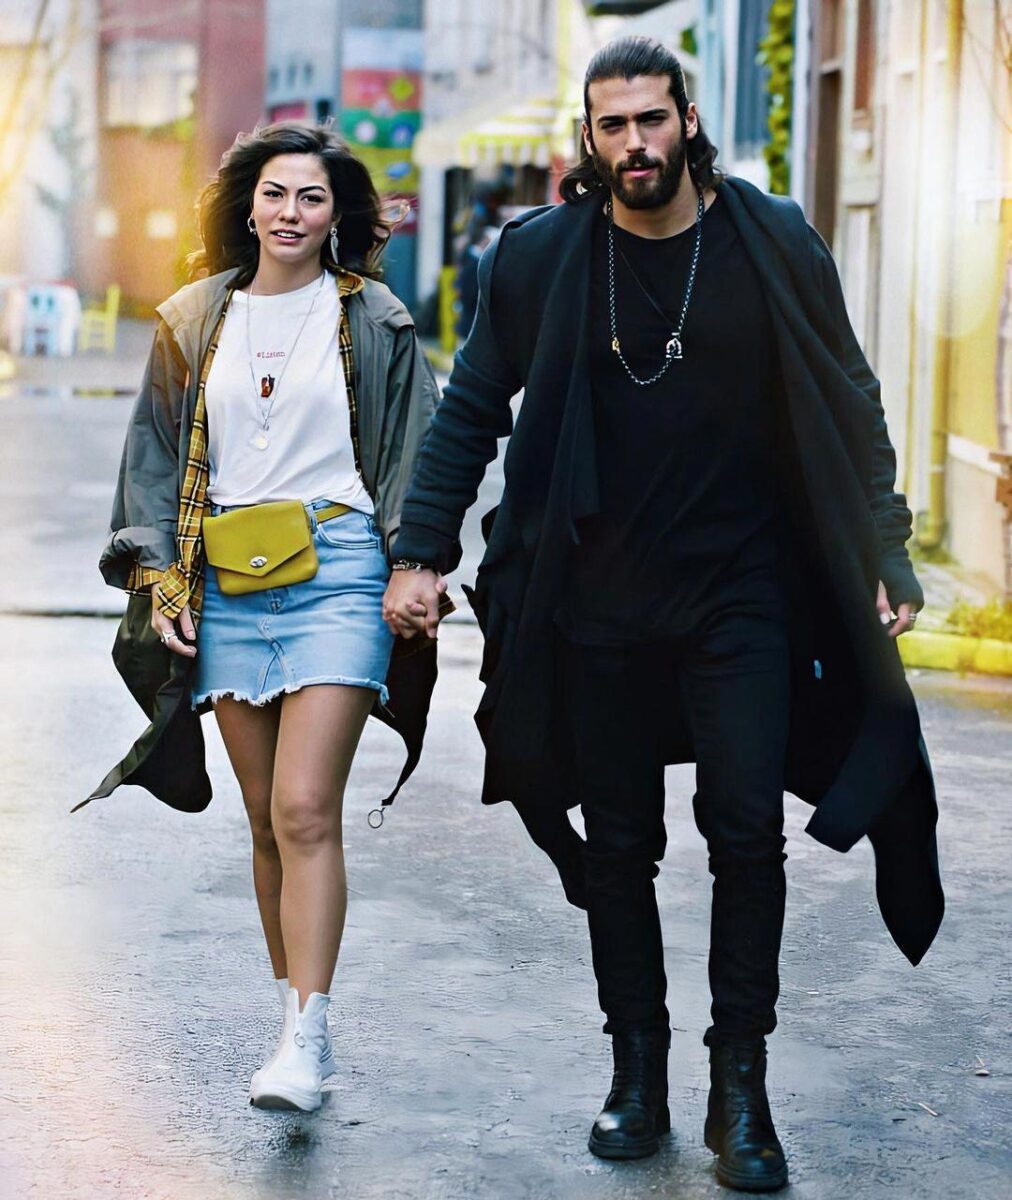 Who Is Can Yaman Wife?